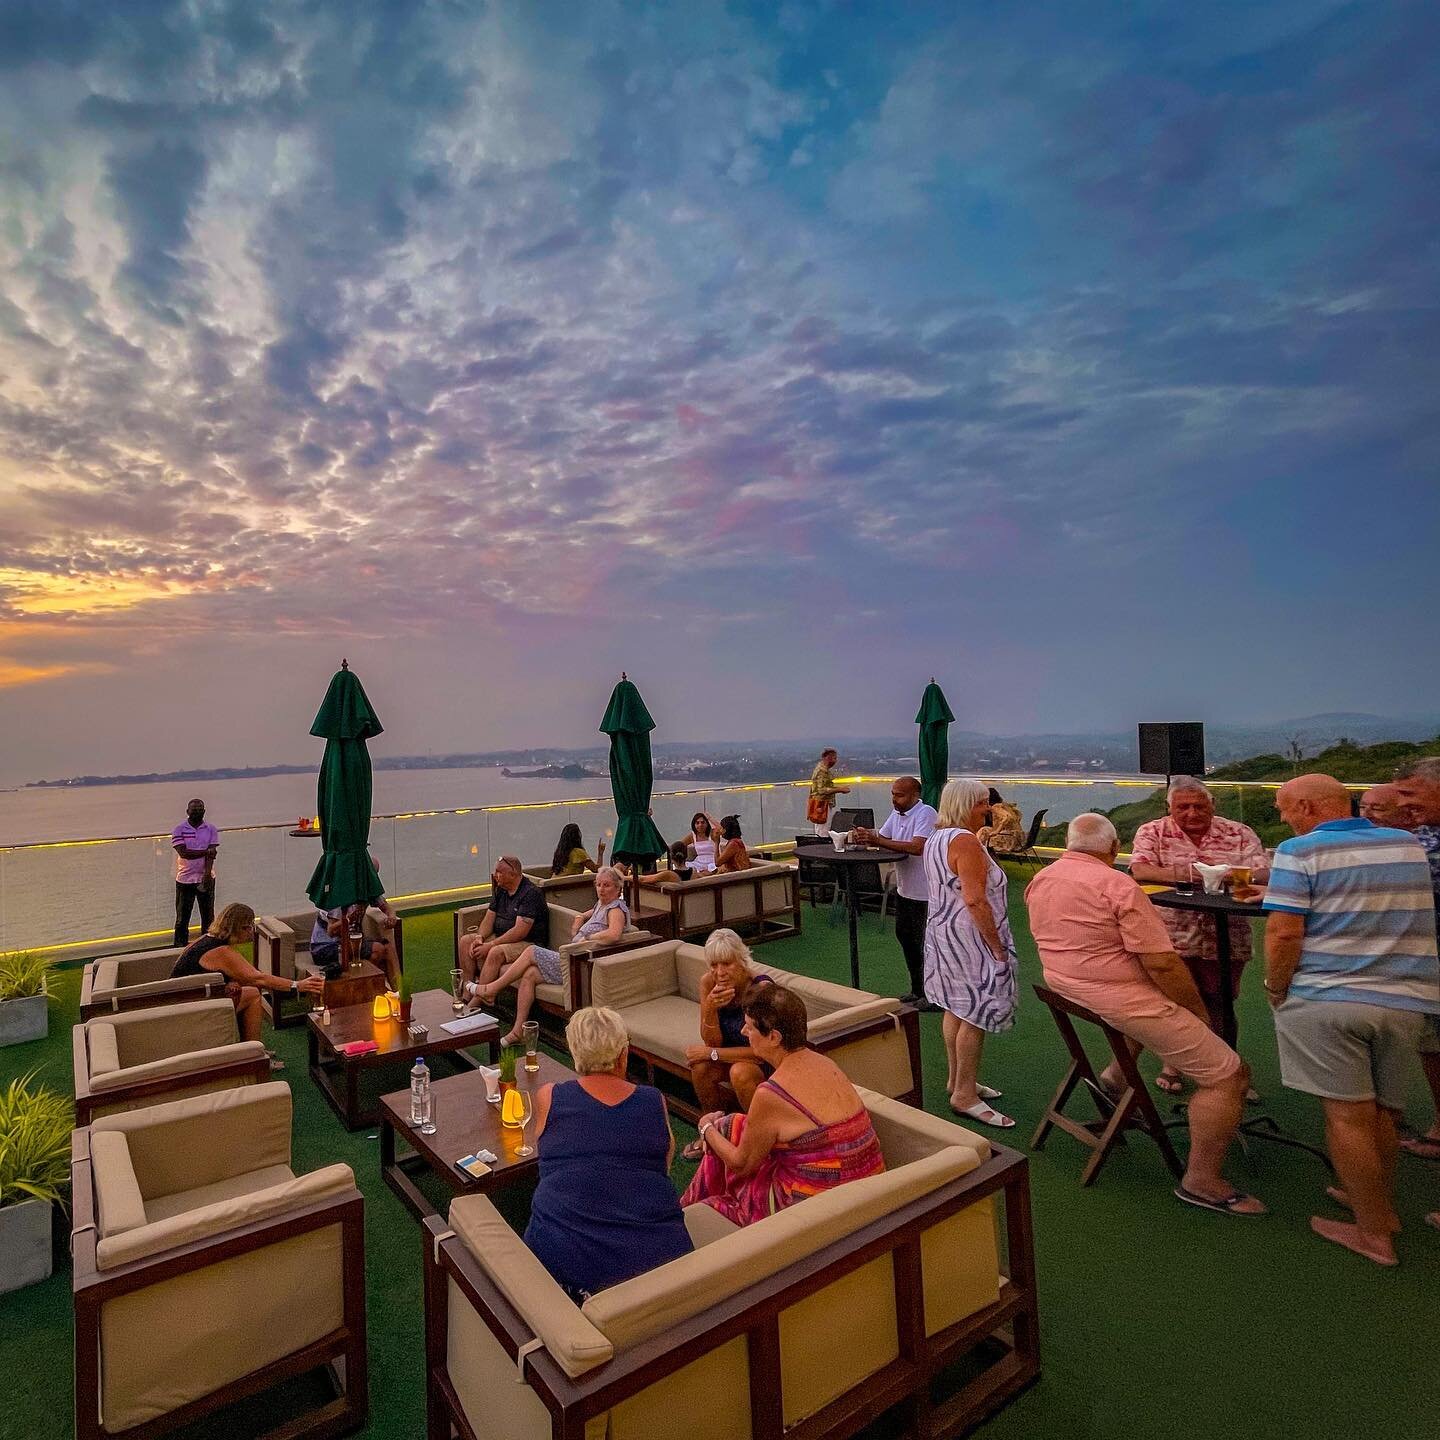 Our rooftop lounge is the best place to enjoy the 🌅 overlooking the Indian 🌊 while sipping a nice cold 🍺.
.
Live music on Saturdays. Follow @buonavista.lounge  for more details
.
.
#lounge #hotel #rooftop #boutiquehotel #sunset #indianocean #lonel